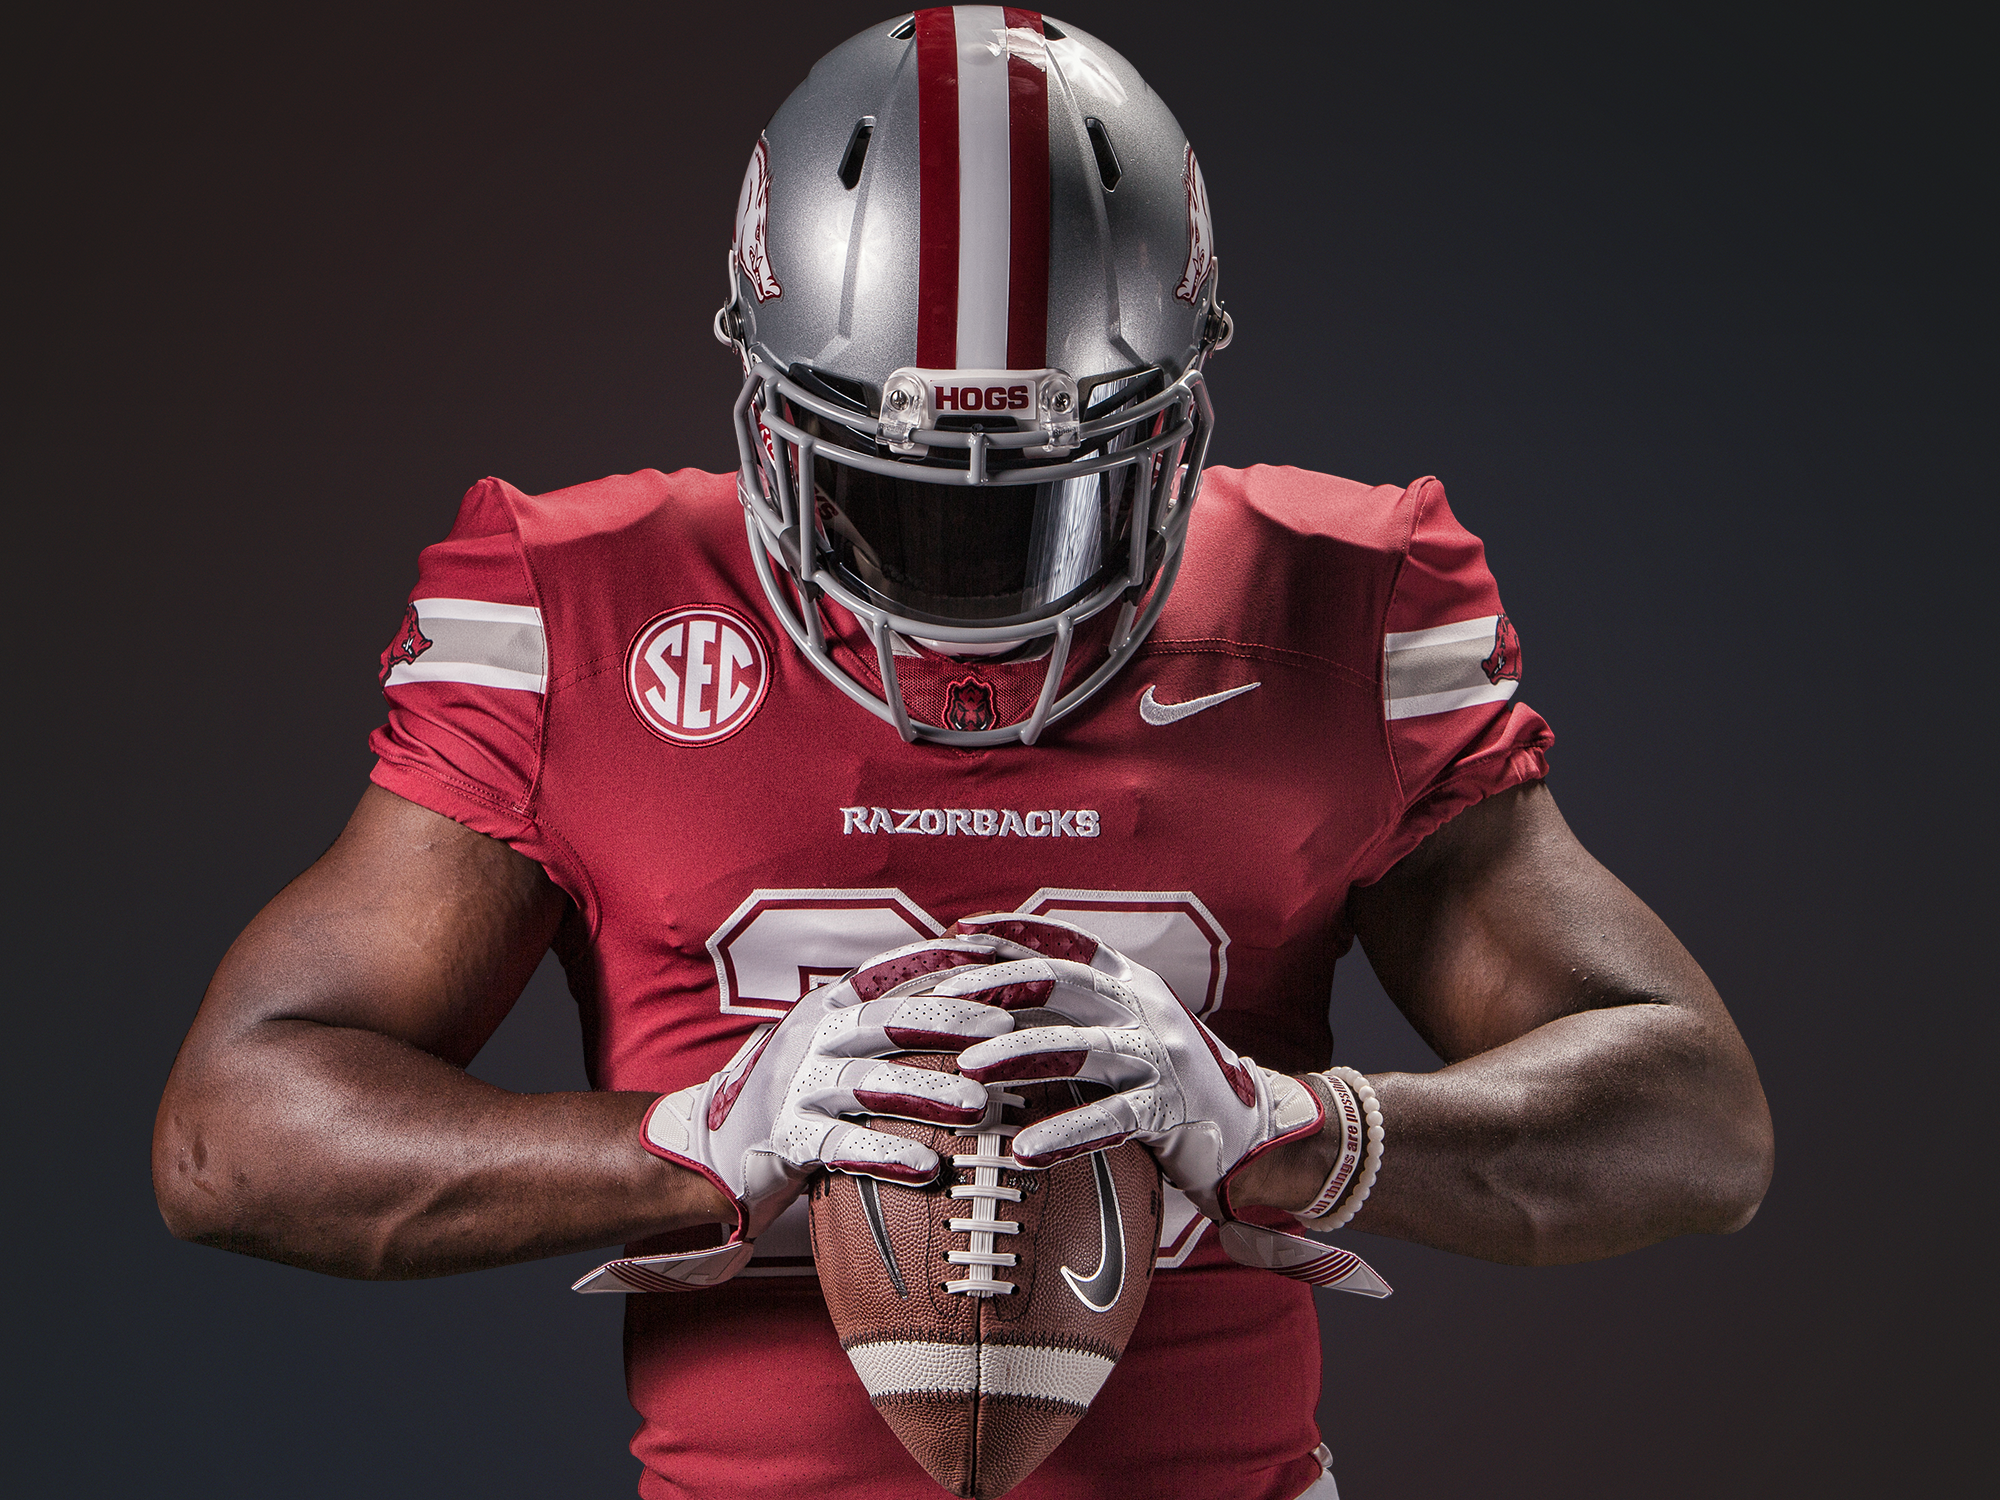 Hogs To Honor Jerry Jones By Wearing Cowboys Themed Uniforms | Fort Smith/Fayetteville ...